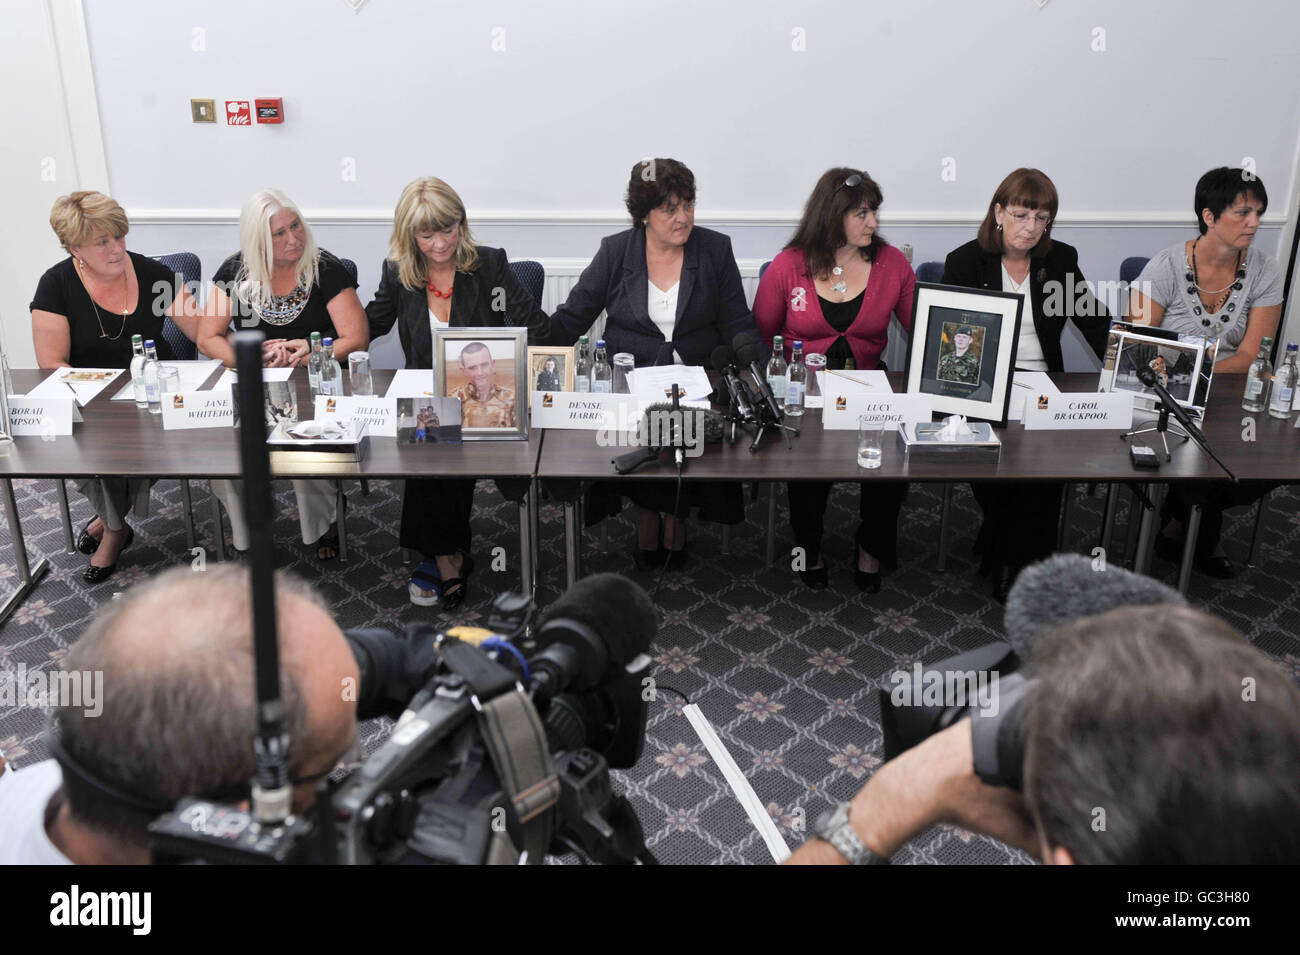 Seven mothers, whose fallen sons who were all killed in Afghanistan, hold a press conference in Redwood Lodge, Failand, Bristol, as they come together to form a charity called Afghan Heroes. Pictured left to right are Deborah Simpson, mother of Daniel Simpson from Croydon, Jane Whitehouse, mother of Corporal Jonathan Horne from Walsall, Jillian Murphy, mother of Rifleman Joseph Murphy from Birmingham, Denise Harris, mother of Cpl Lee Scott from Somerset, Lucy Aldridge, mother of Rifleman William Aldridge from Herefordshire, Carol Brackpool, mother of Private John Brackpool from West Sussex Stock Photo